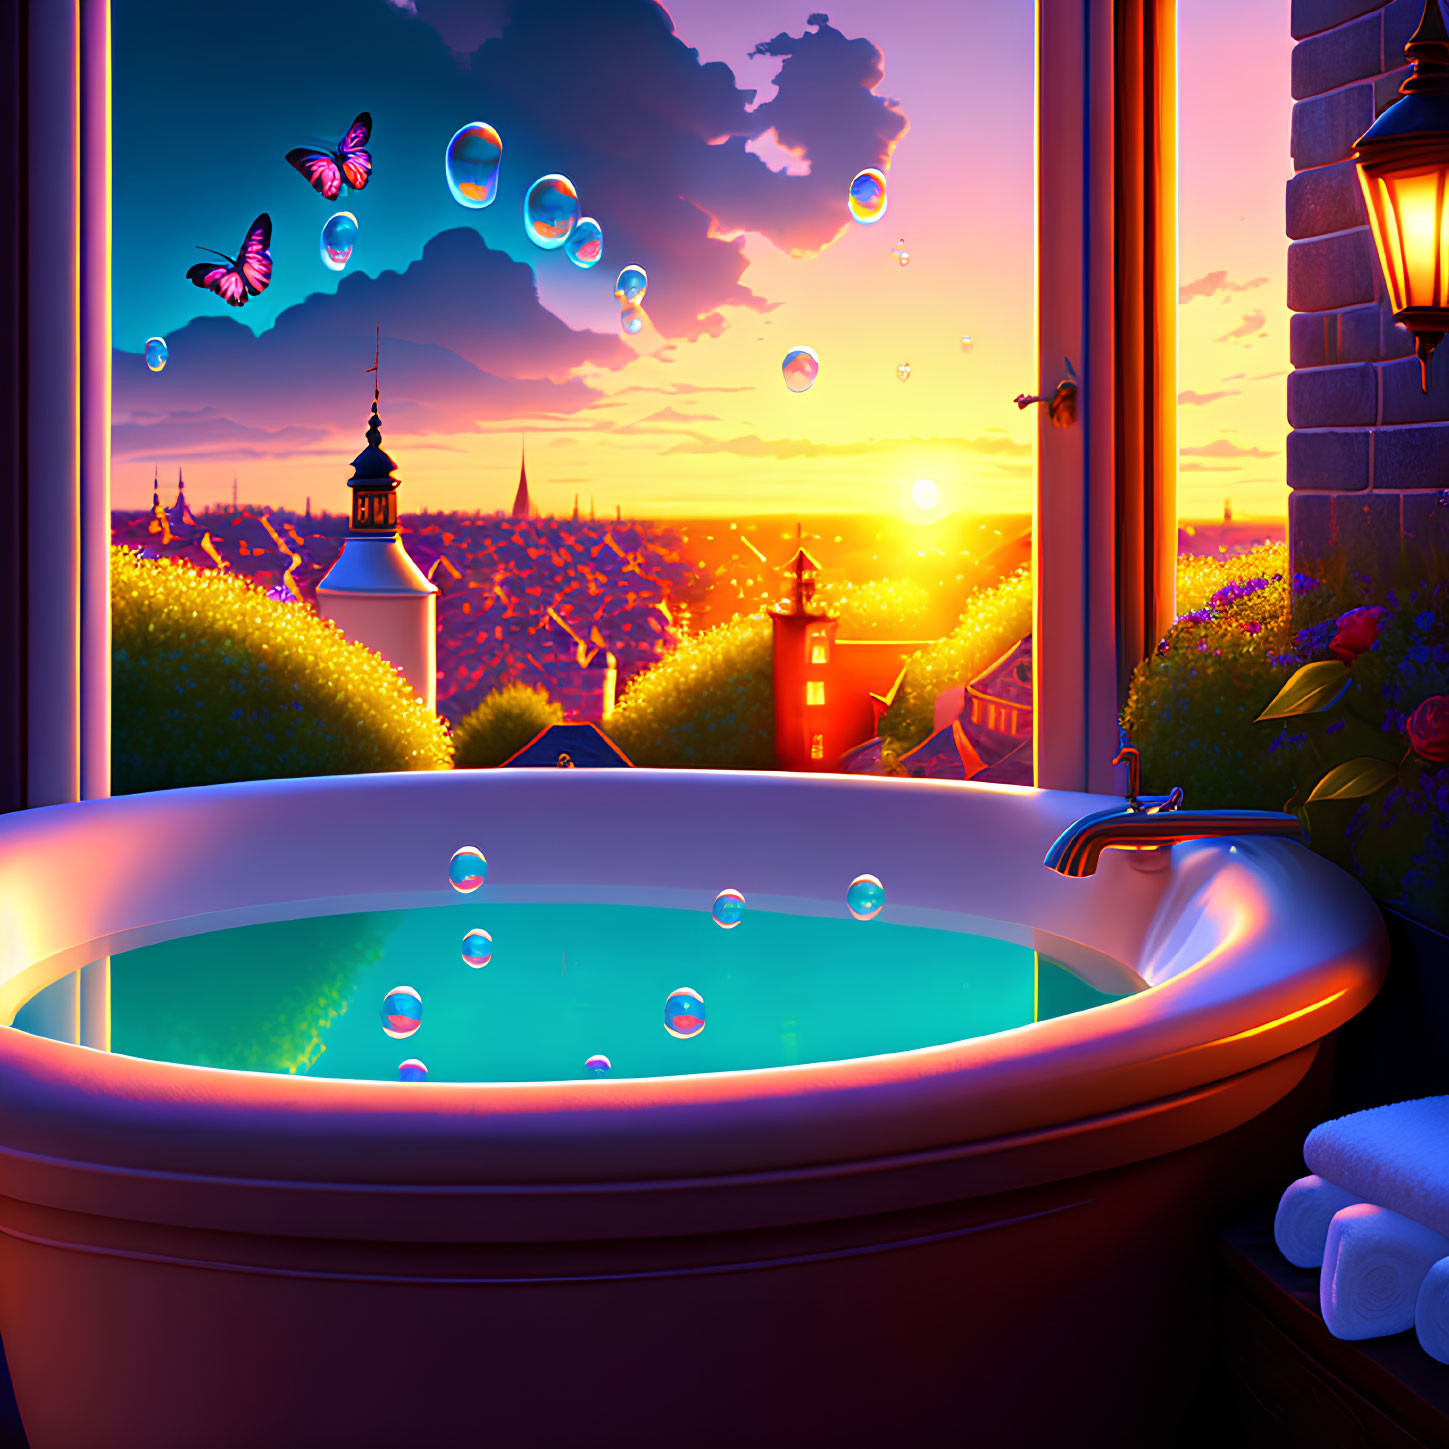 Bathtub overlooking sunset cityscape with butterflies and bubbles.